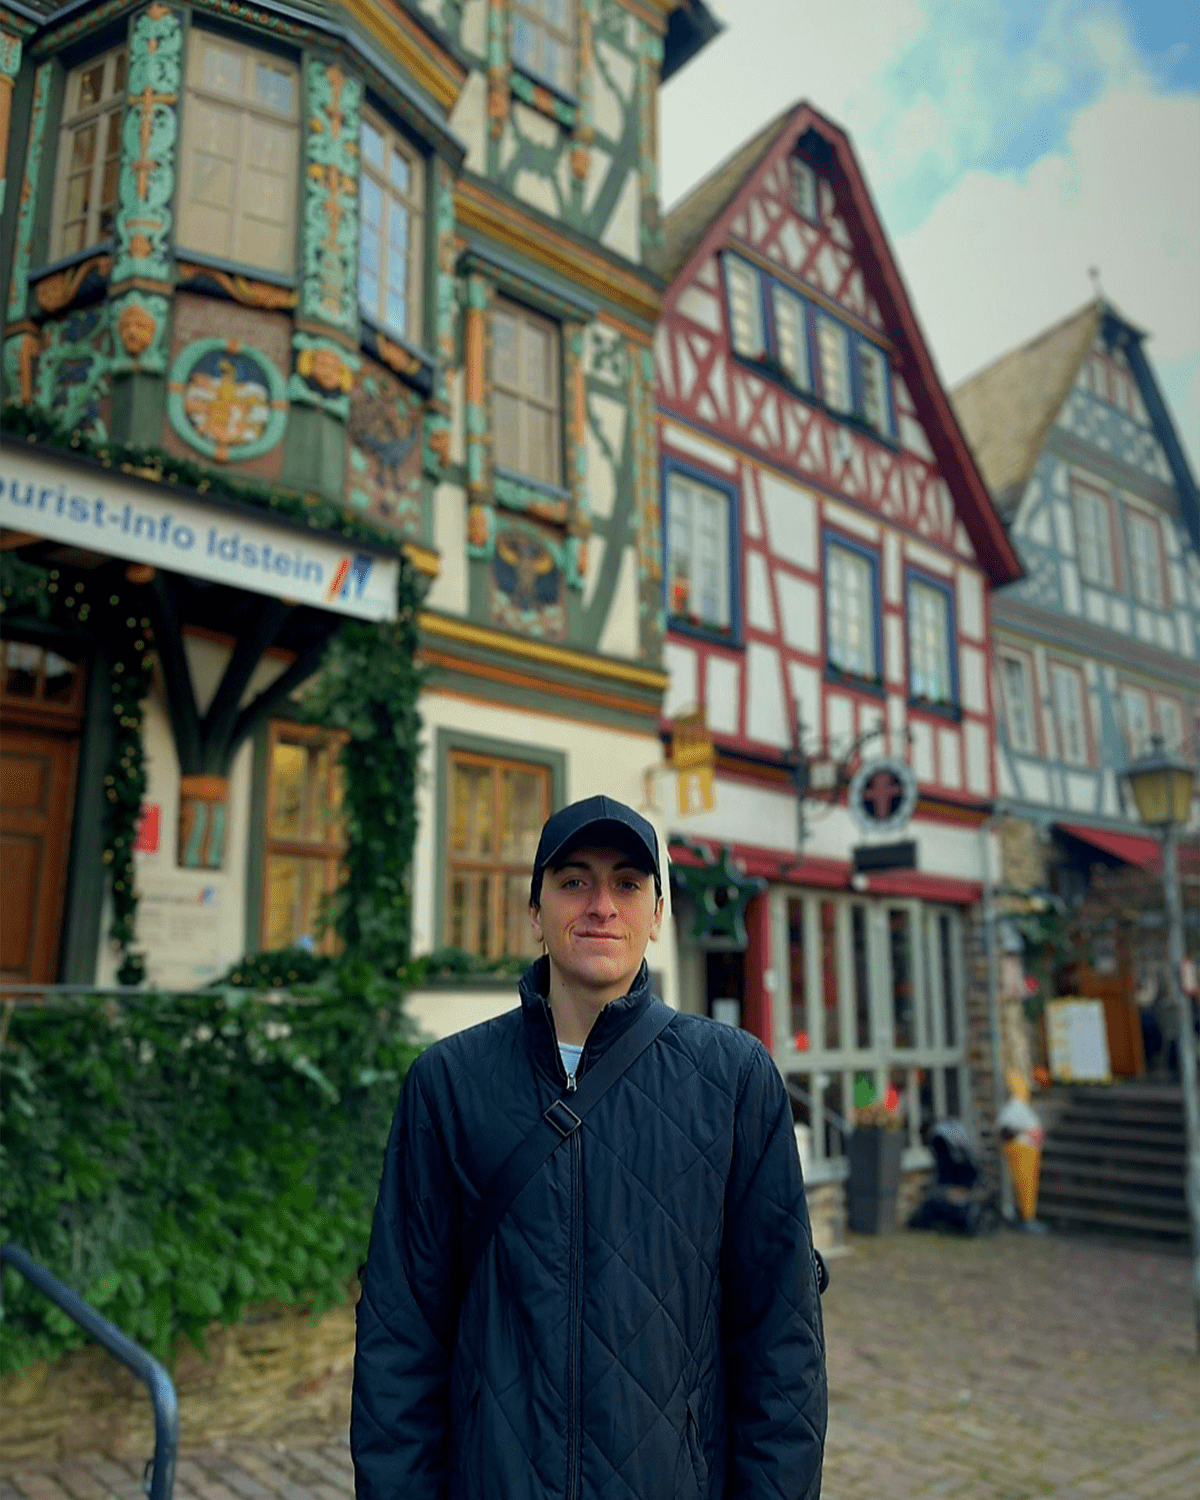 Zackrey stands in front of three colorful, half-timbered houses.